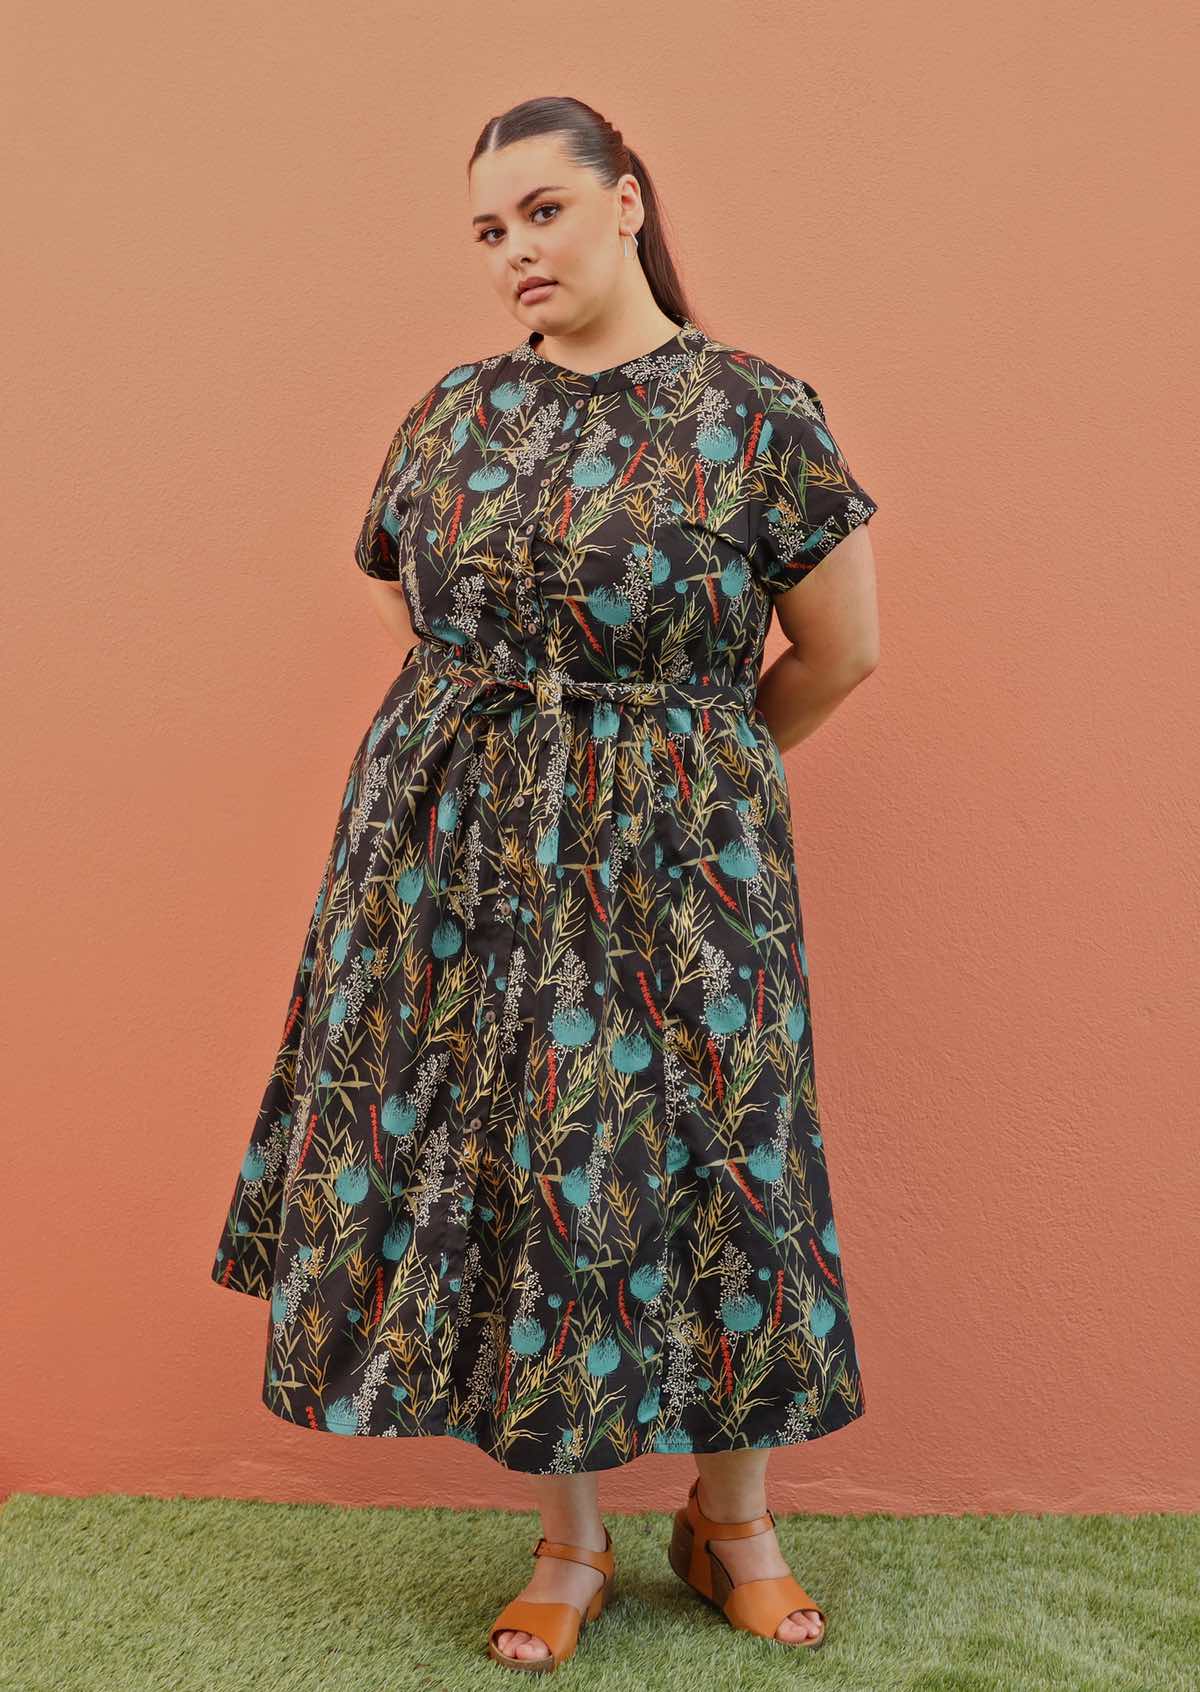 Plus size model wearing Vivien dress in black and teal with pockets and buttons up front